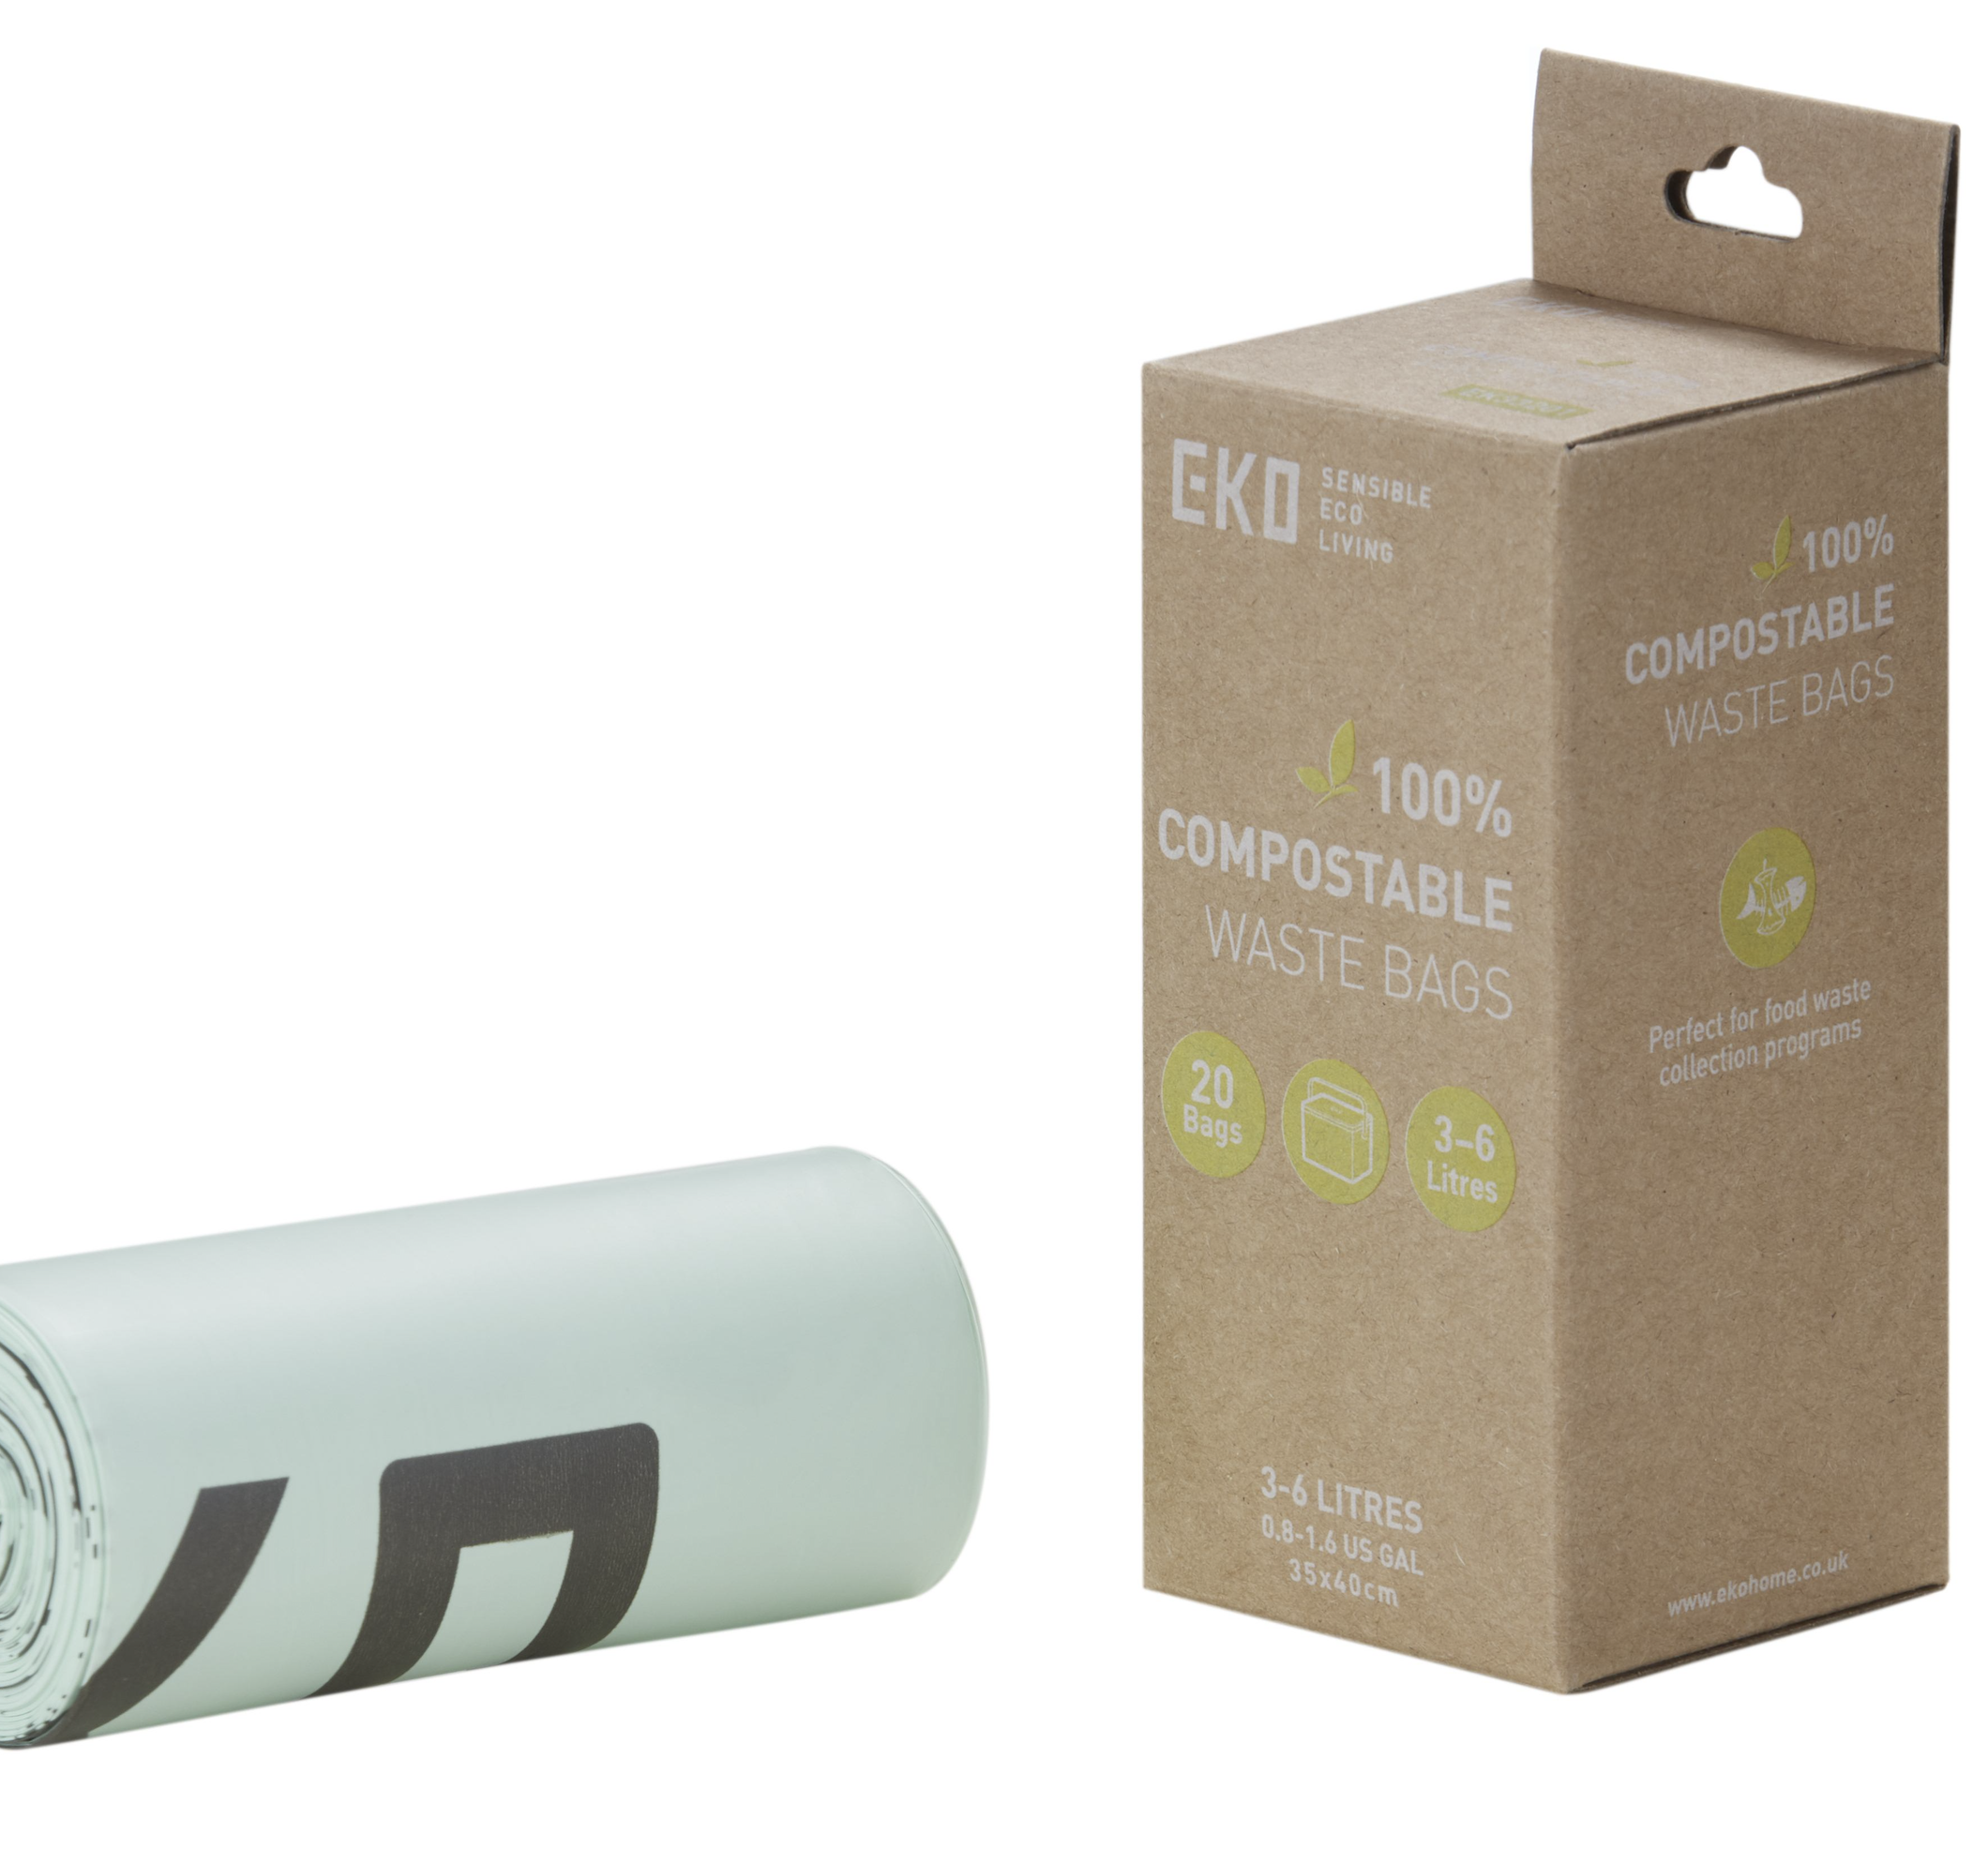 Your main bin can now be lined with a compostable bag thanks to EKO